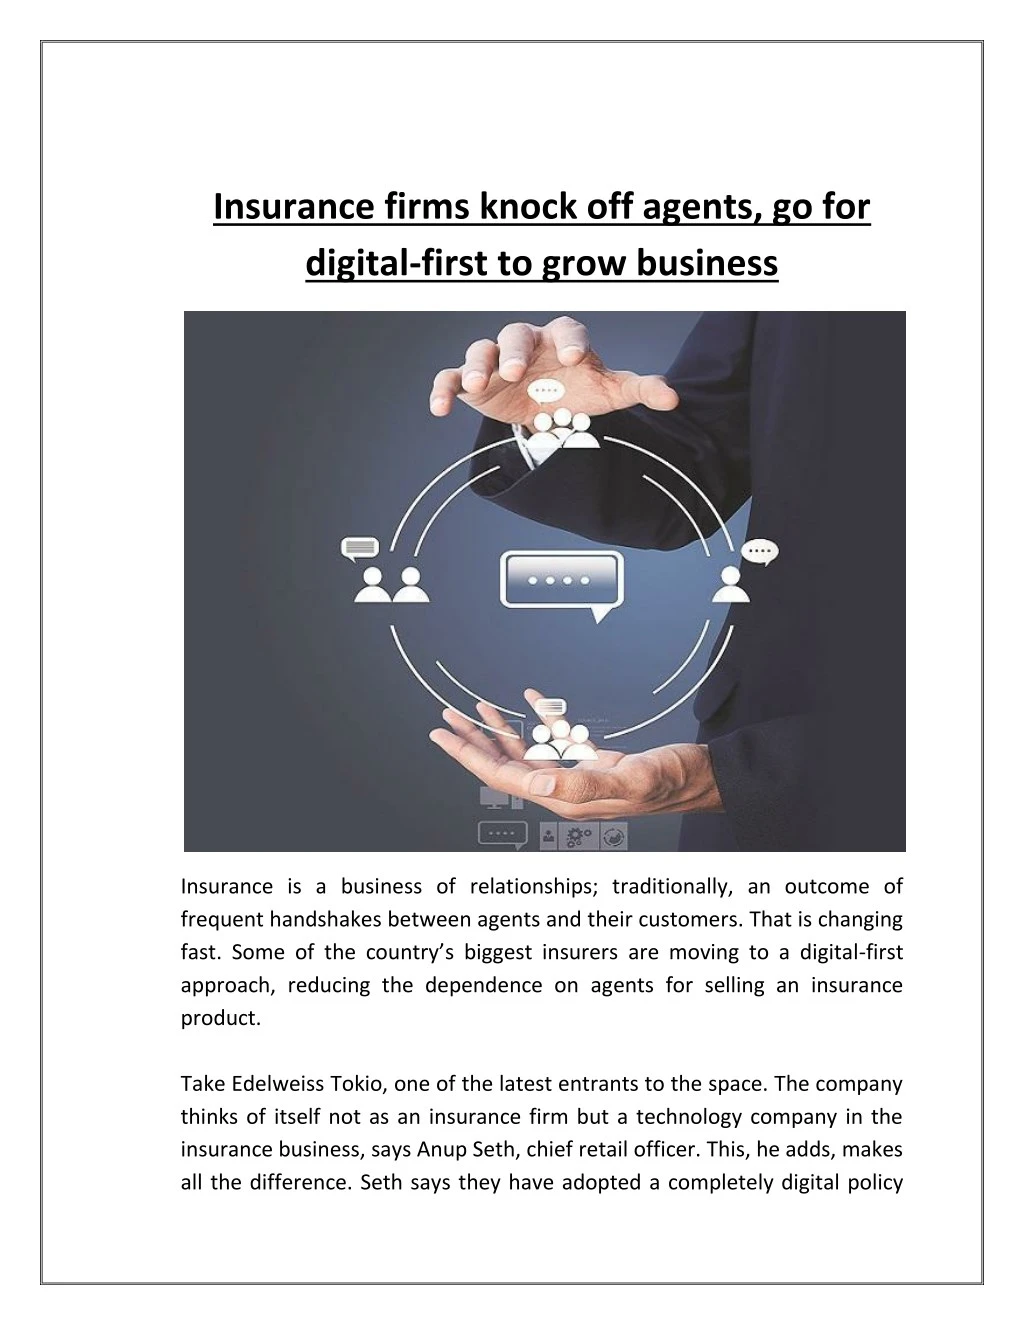 insurance firms knock off agents go for digital